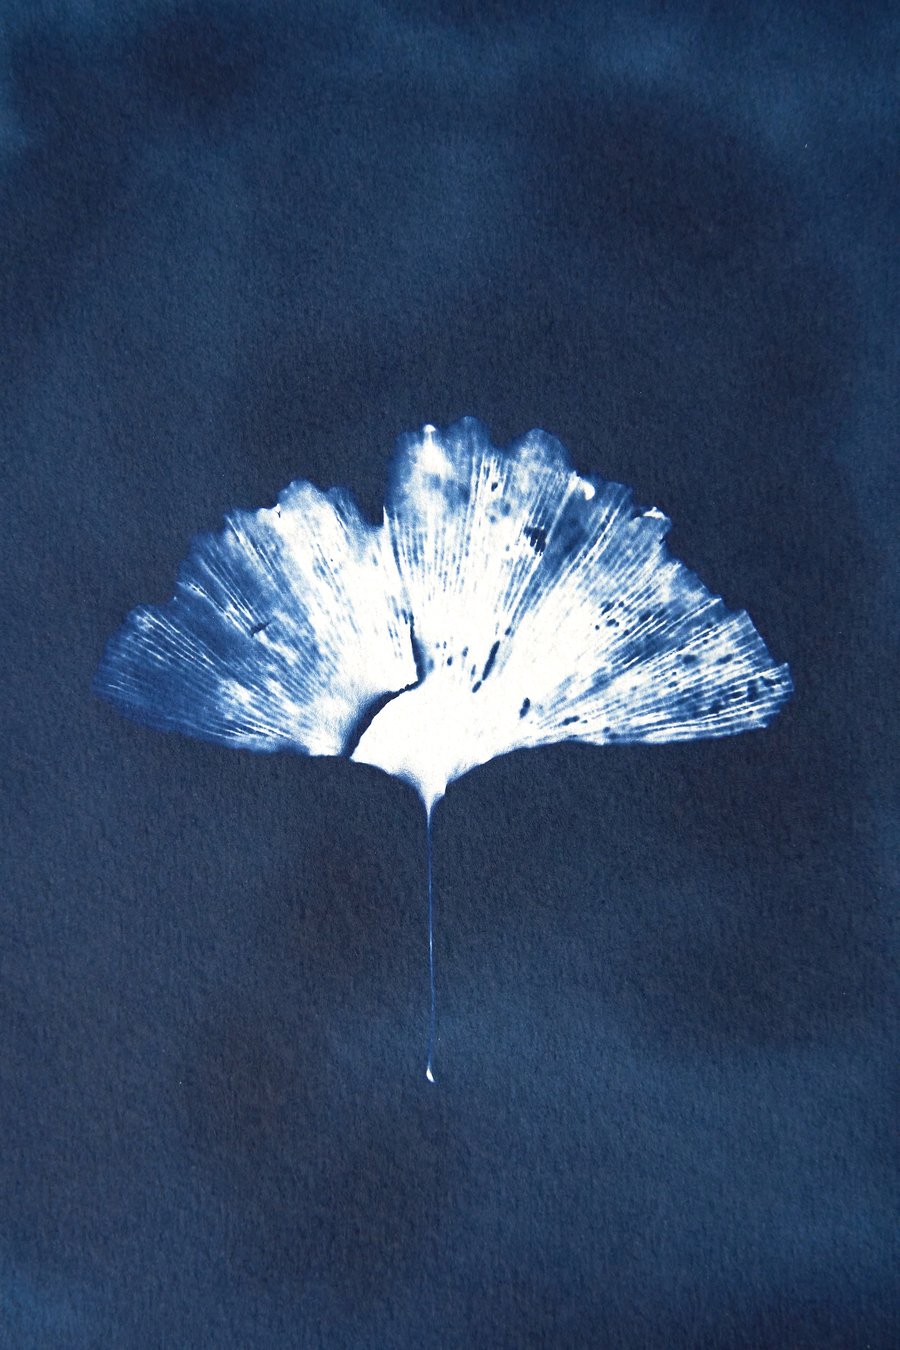 cyanotype print: "Ginkgo". Original, one of a kind, mounted ready to frame.